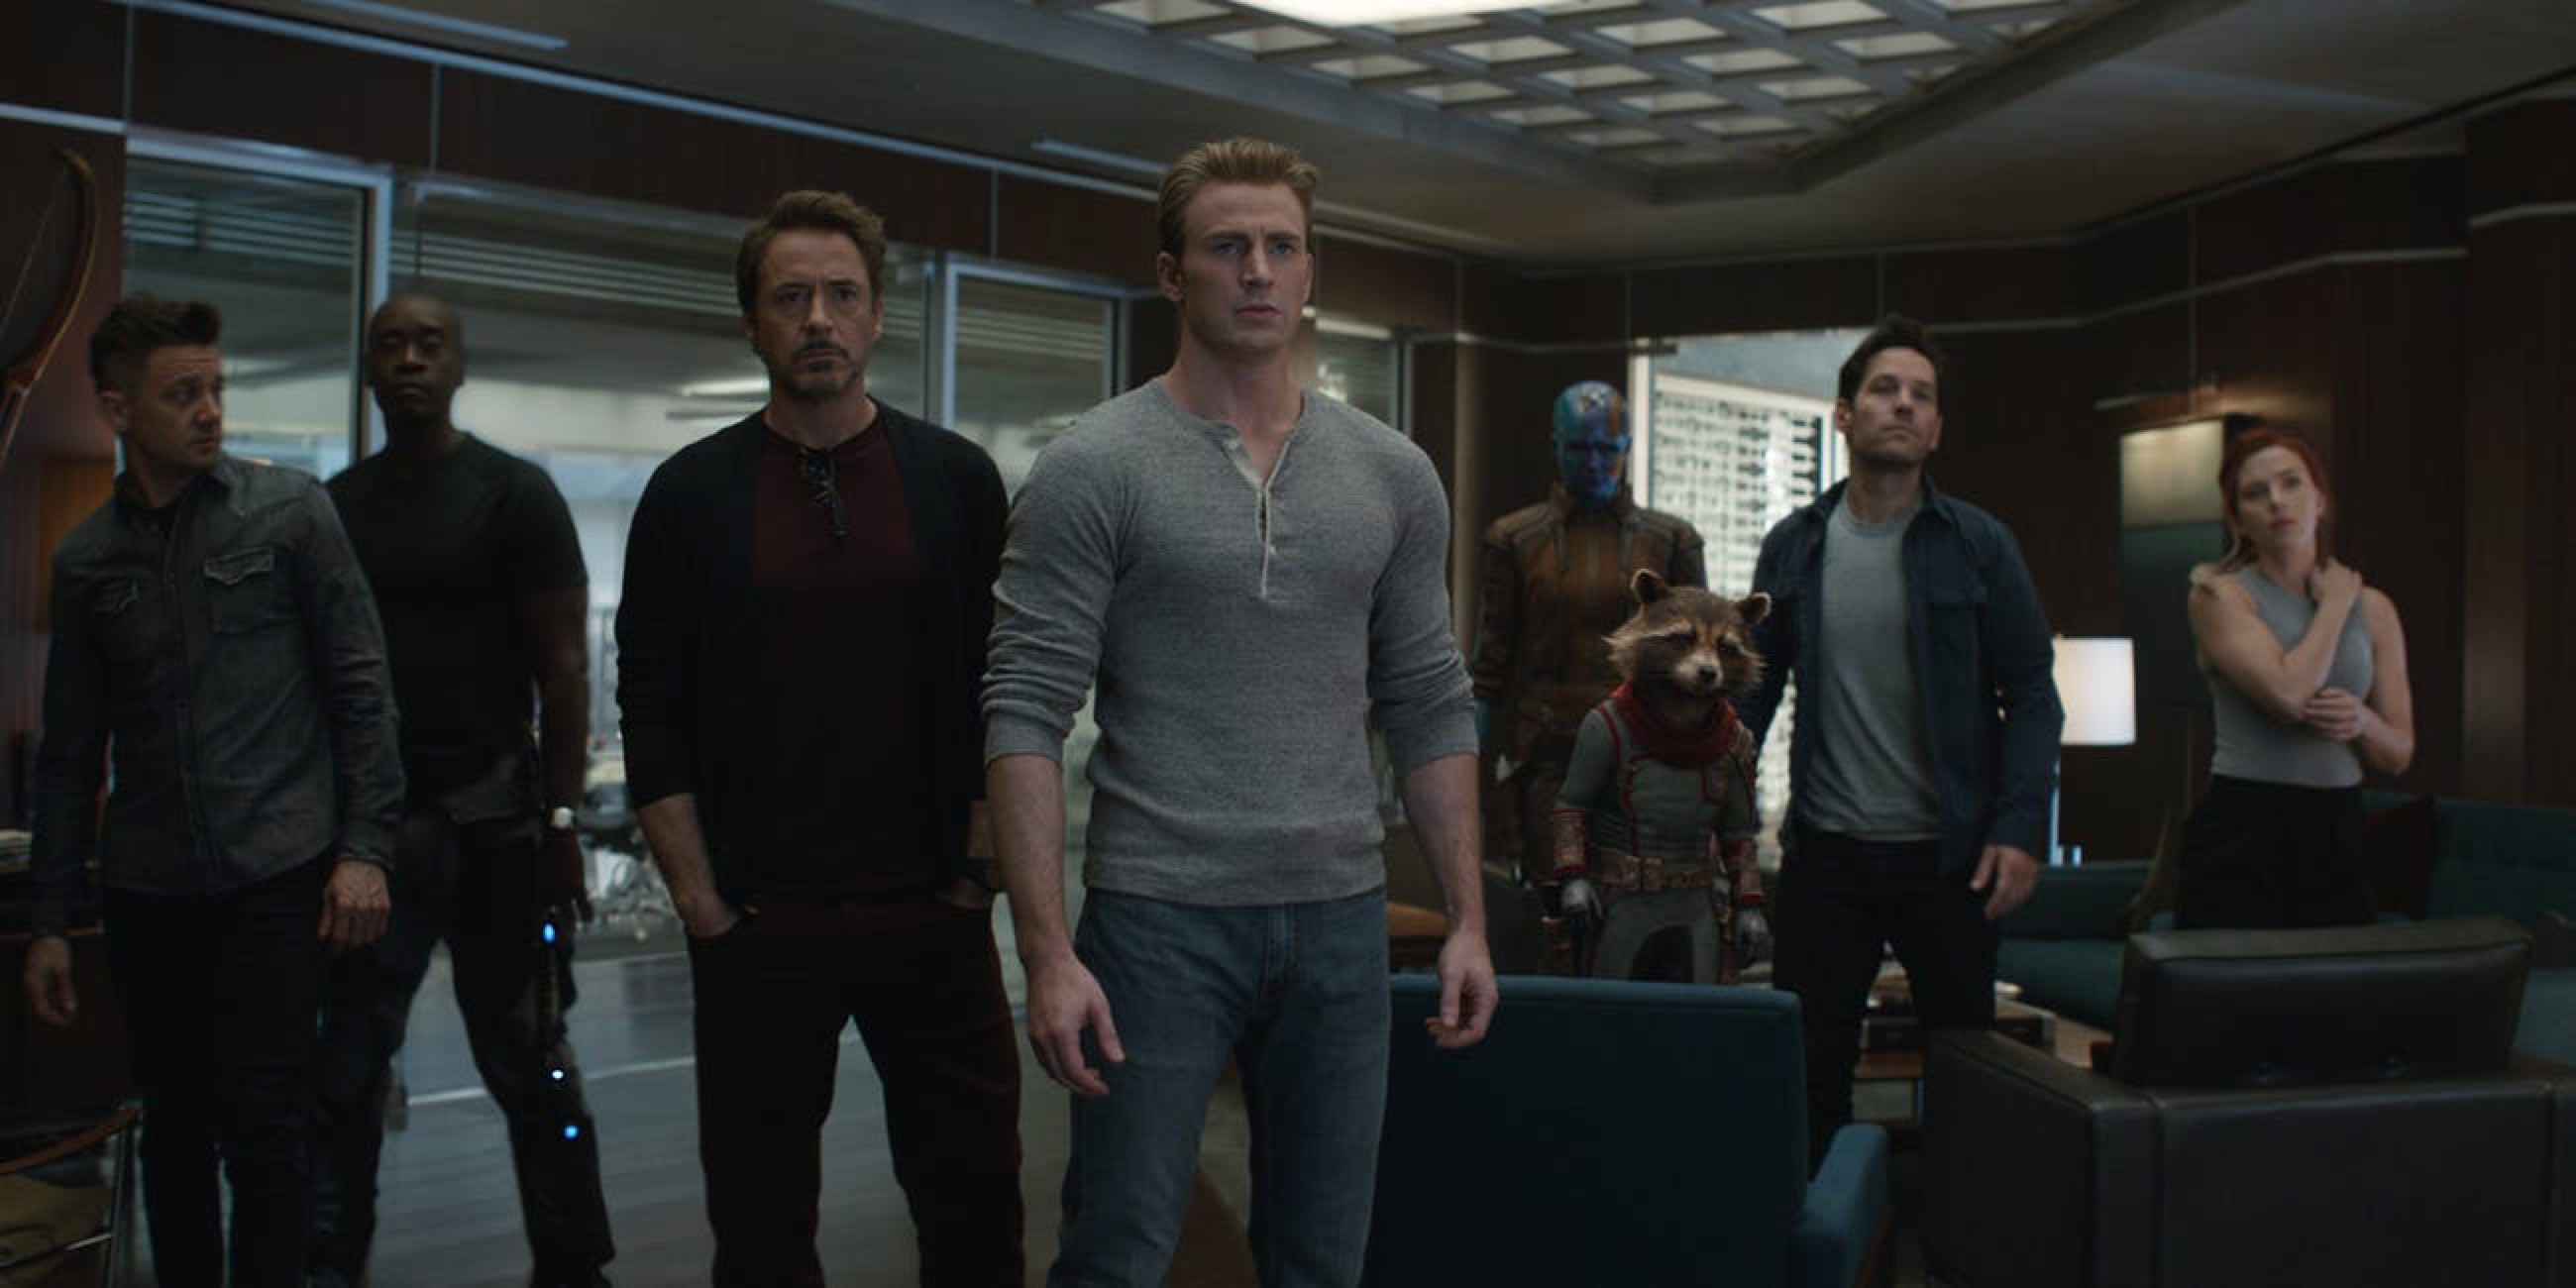 Which Avenger Are You? Avengers: Endgame